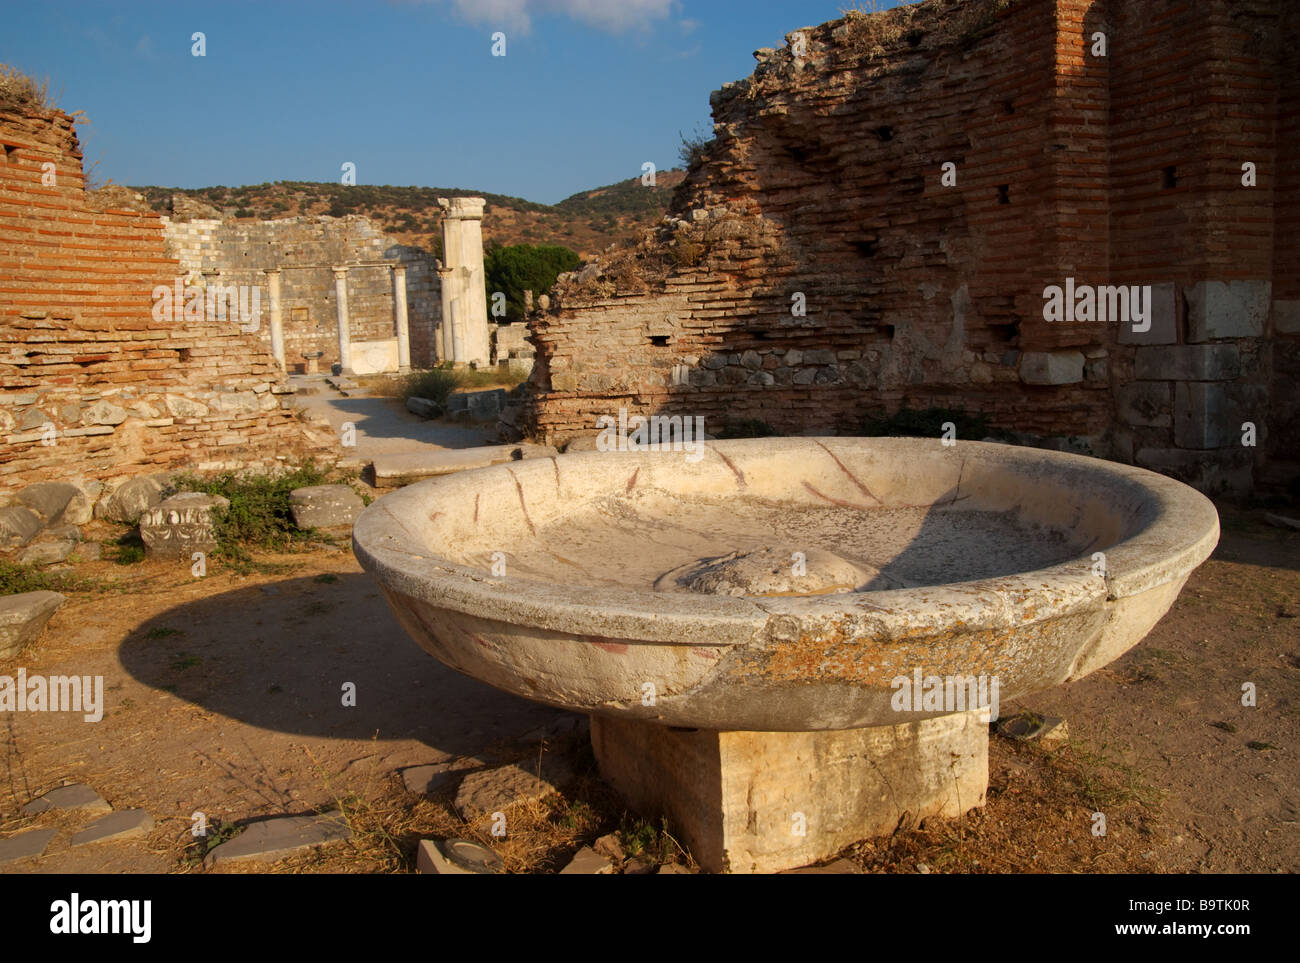 Baptismal font in the ruins of the Church of St Mary Ephesus Turkey Stock Photo